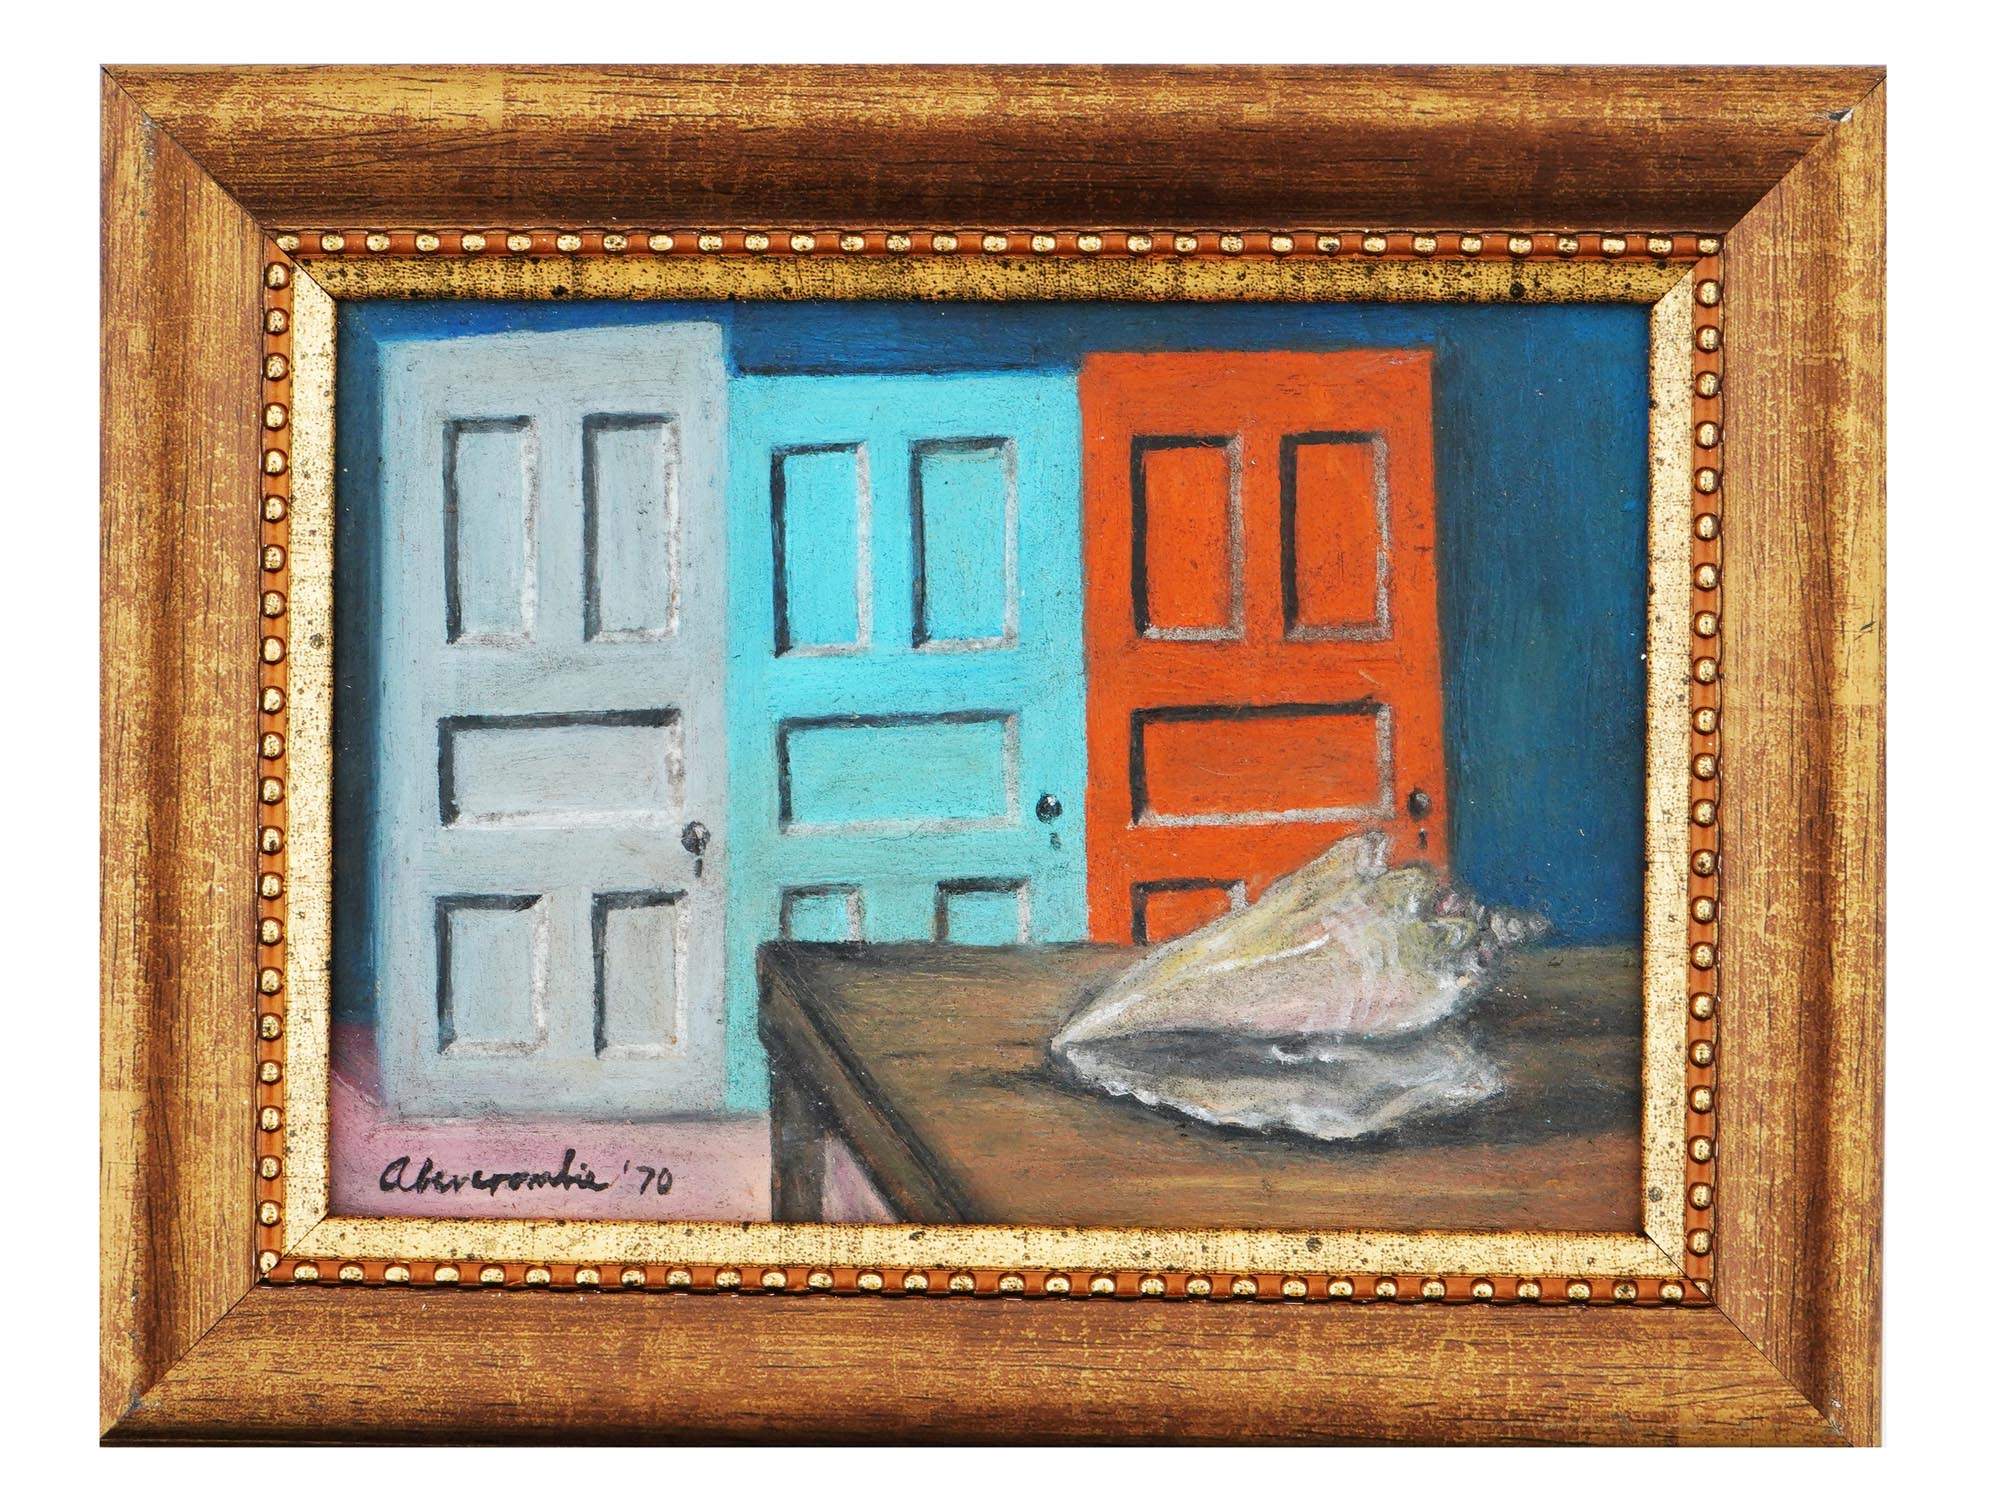 GERTRUDE ABERCROMBIE DOOR AND SHELL OIL PAINTING 1970 PIC-1